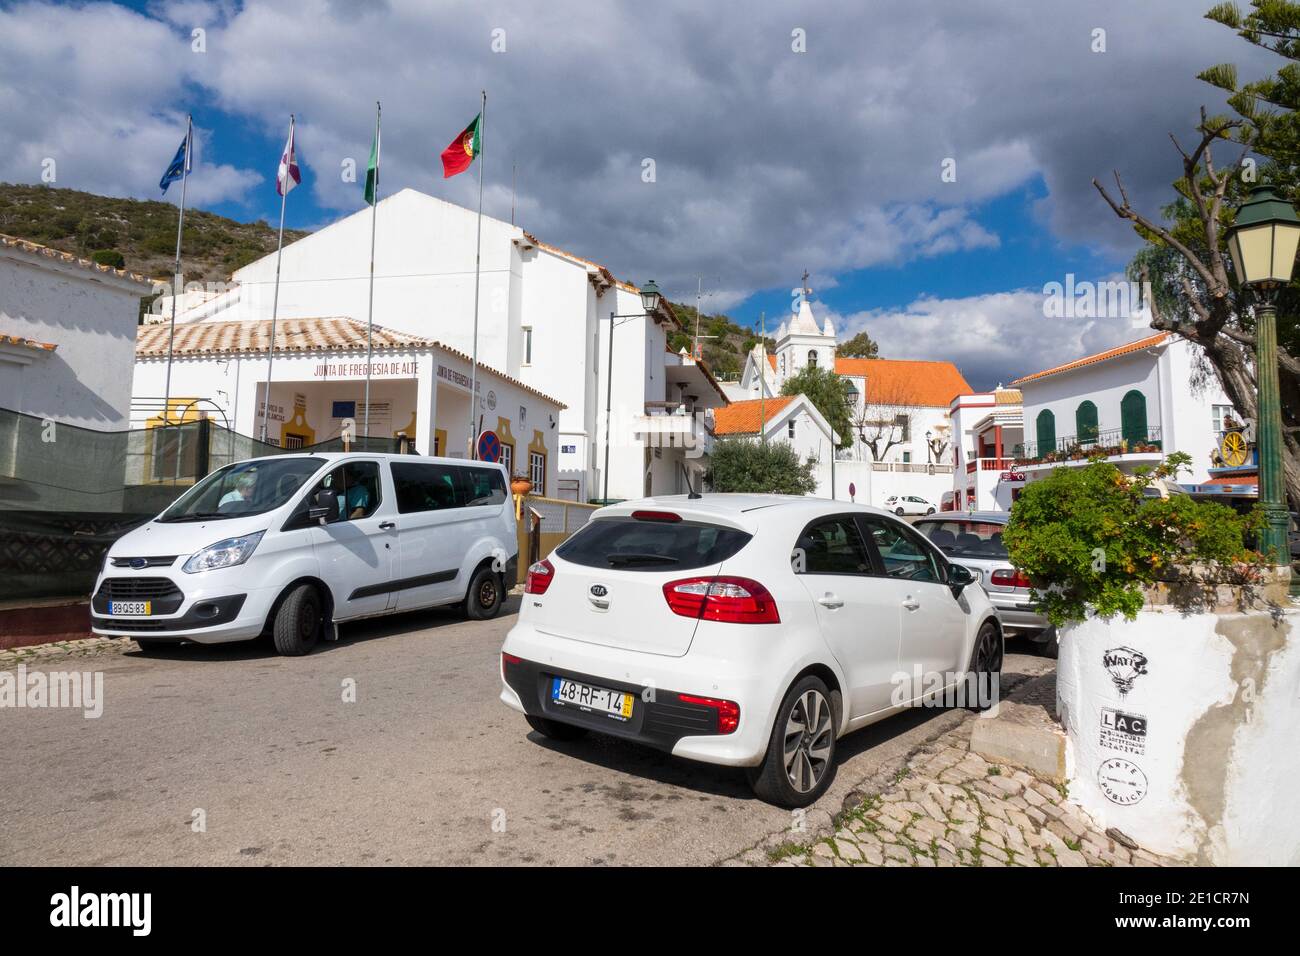 The Main Street Alte Into The Hilltop Village Of Alte Portugal Stock Photo